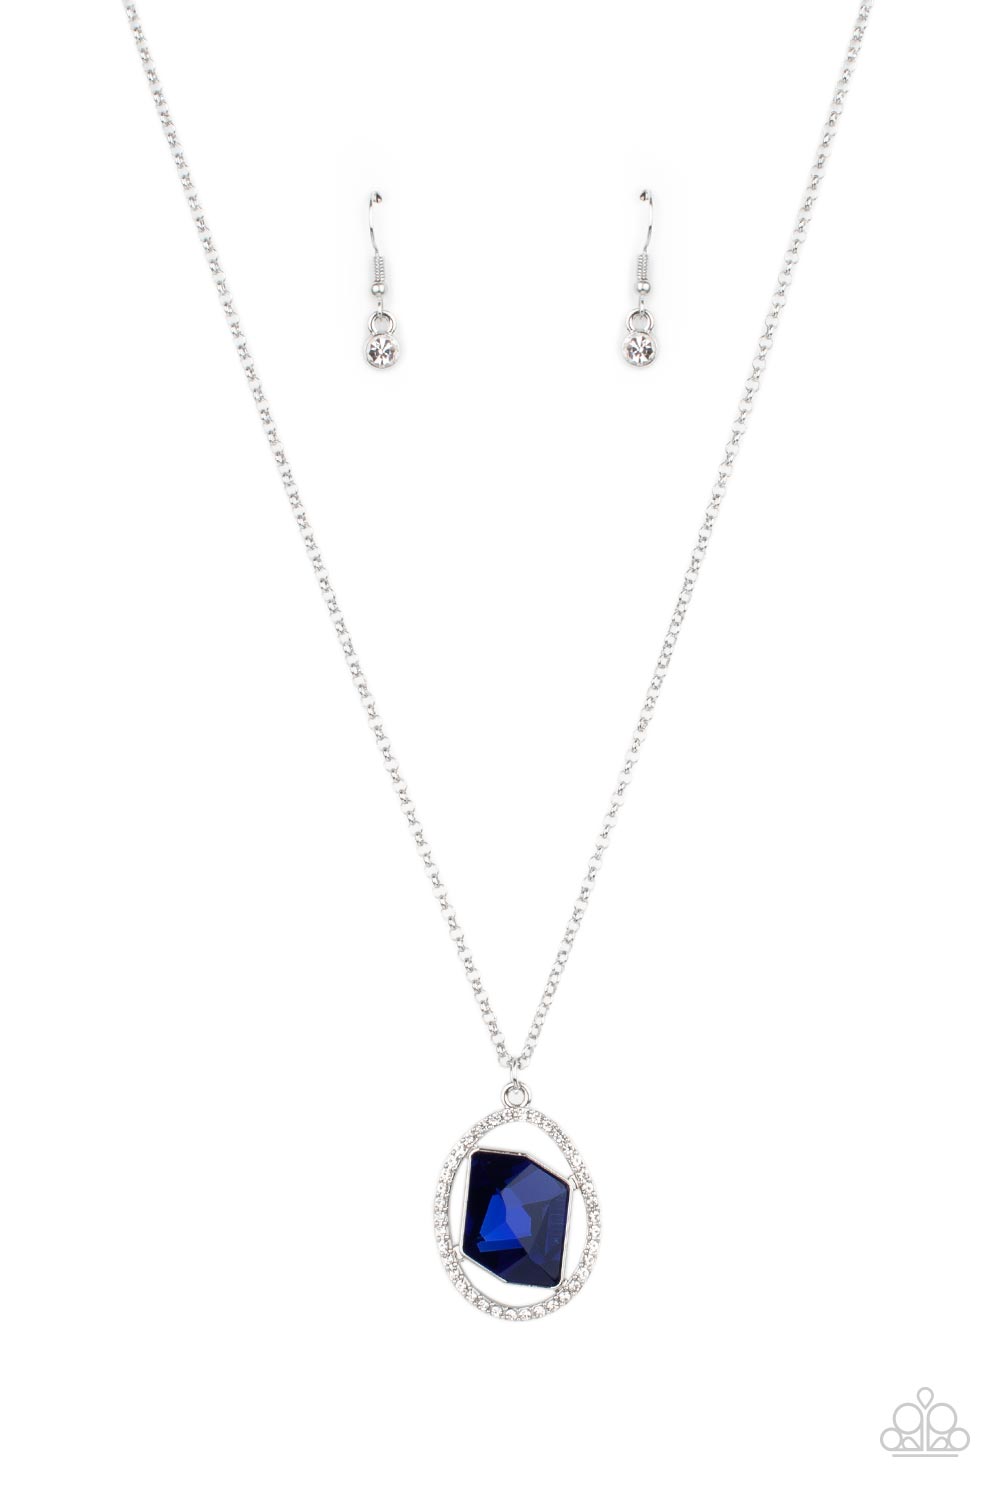 Undiluted Dazzle - Blue ***COMING SOON*** - Bling With Crystal